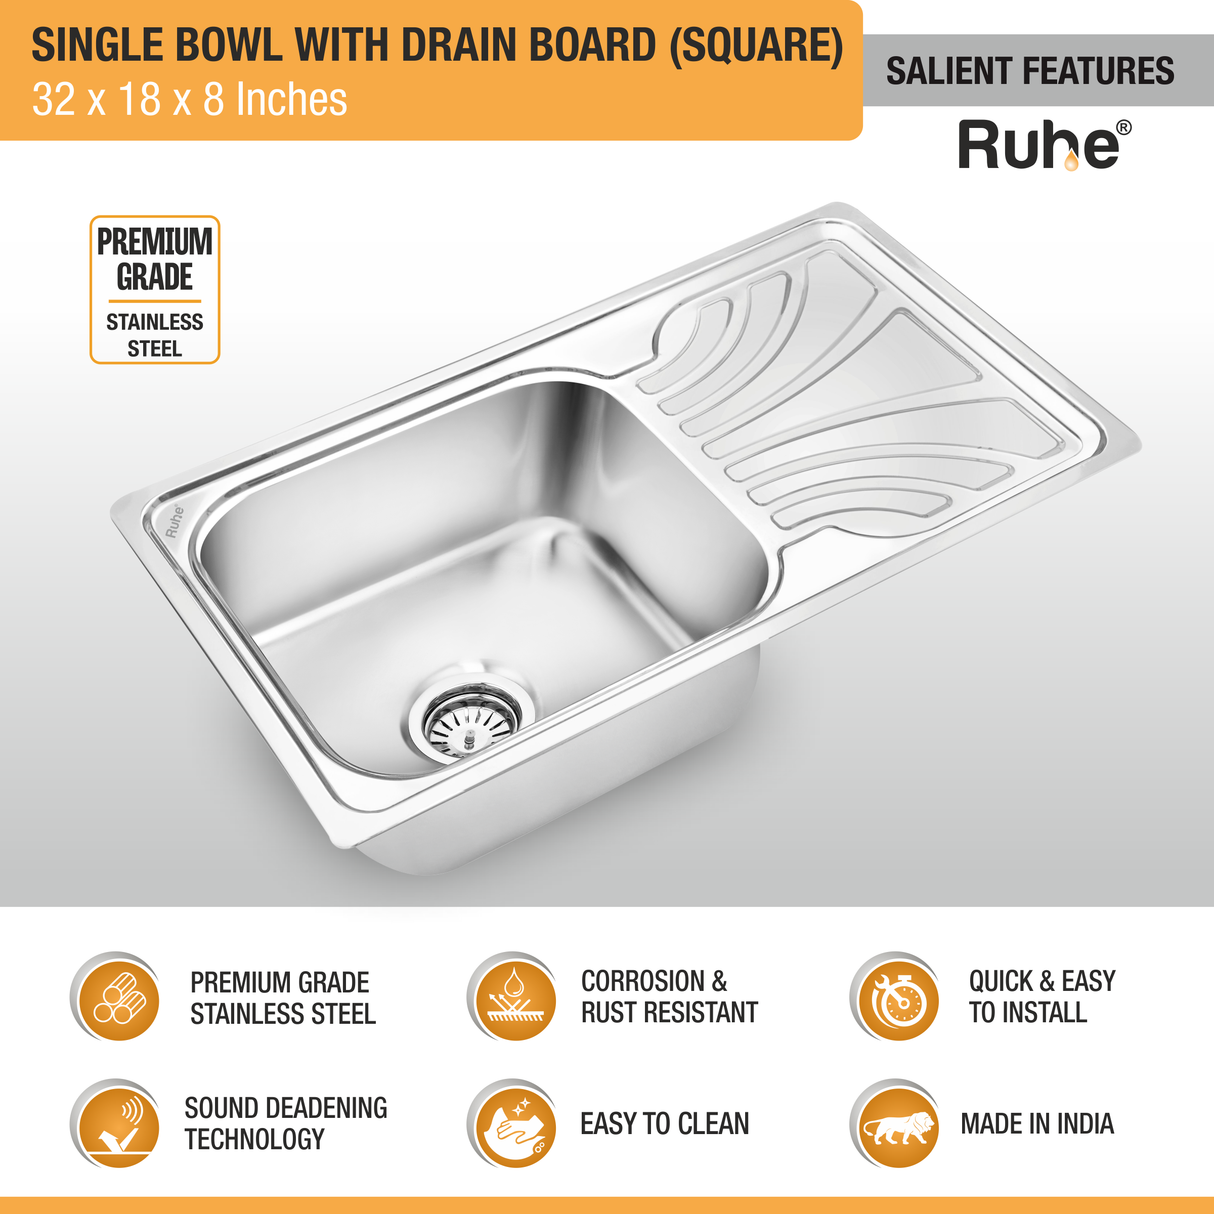 Square Single Bowl (32 x 18 x 8 inches) Kitchen Sink with Drainboard features